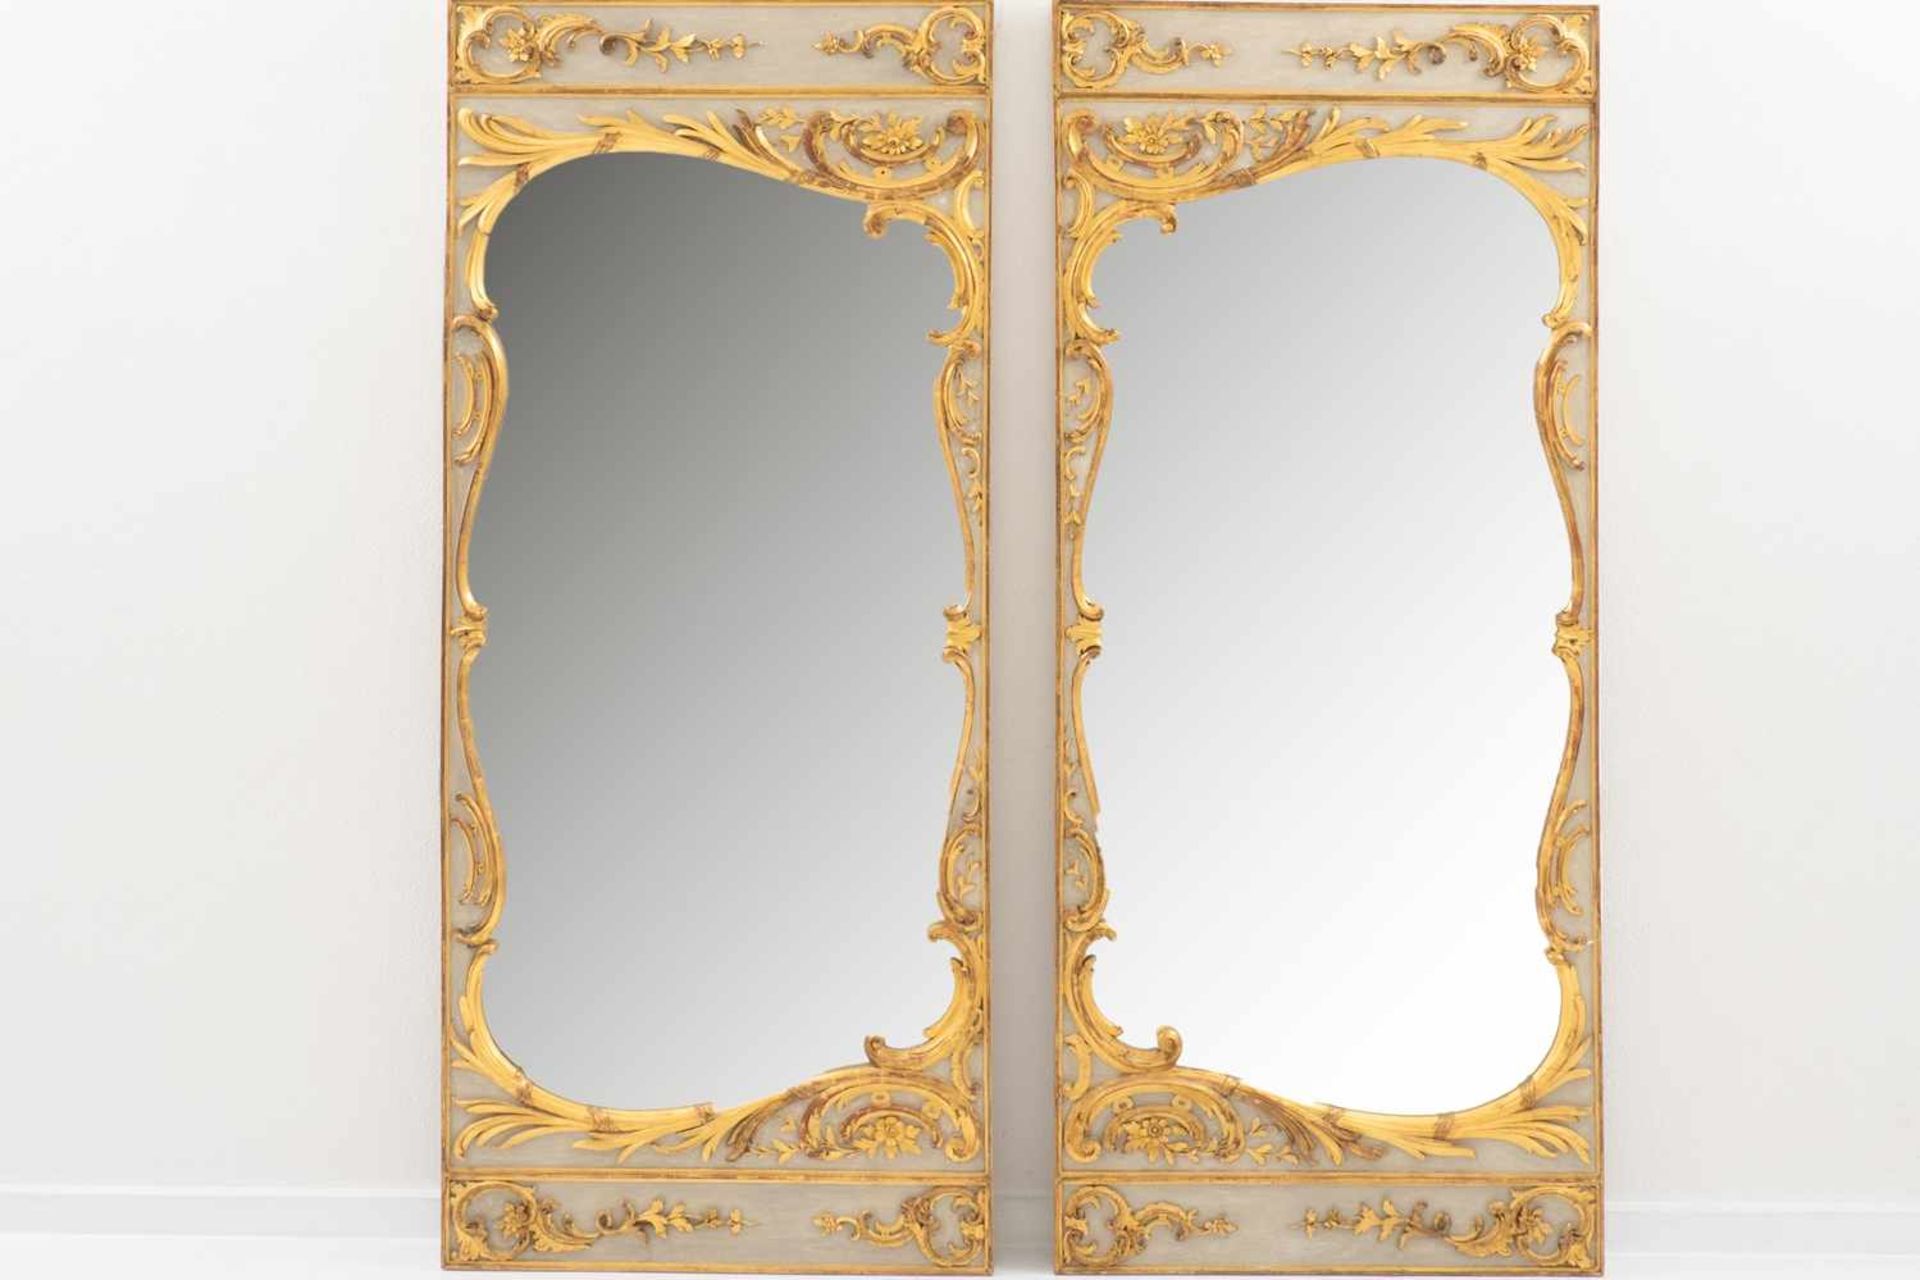 Pair of ornate mirrors with white and gold setting